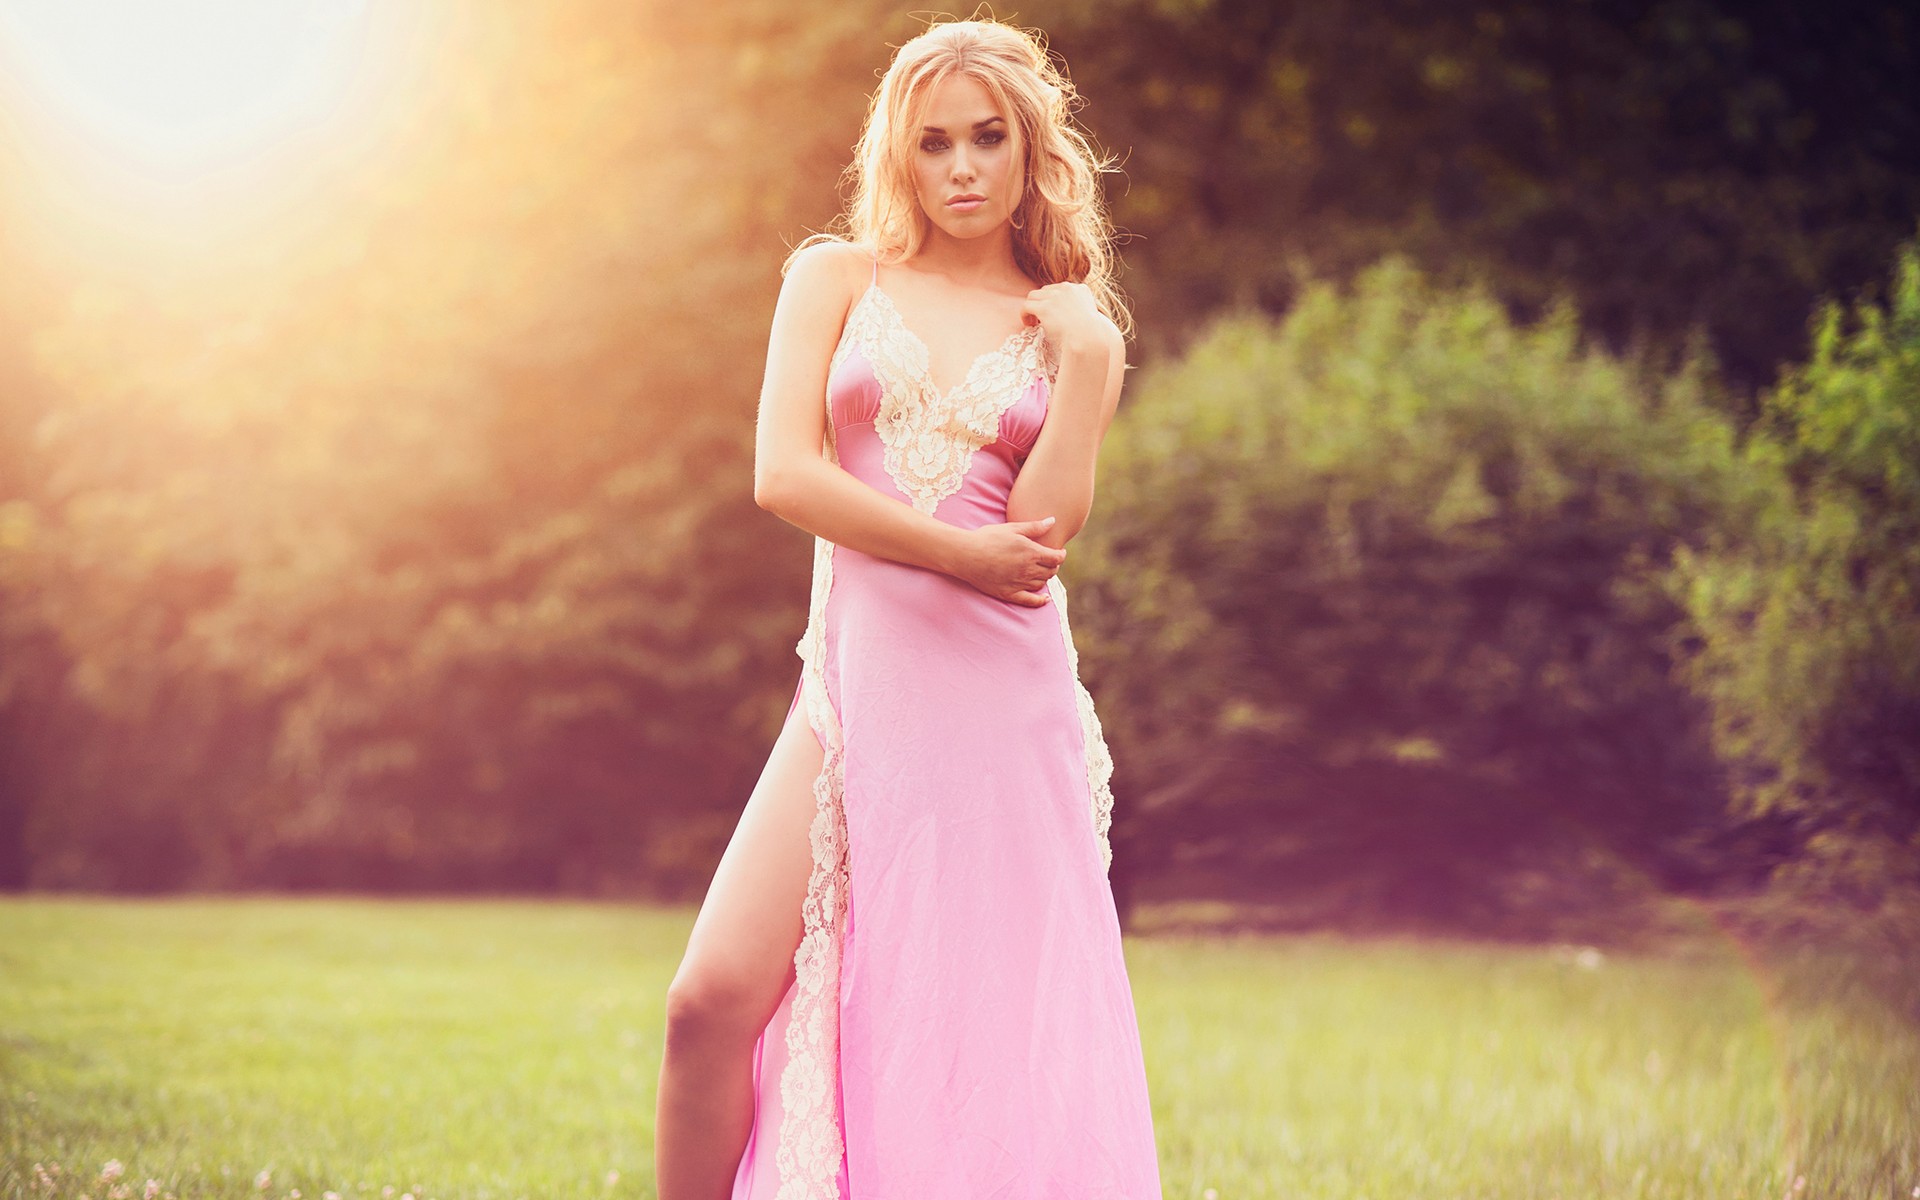 Blond girl in a pink dress